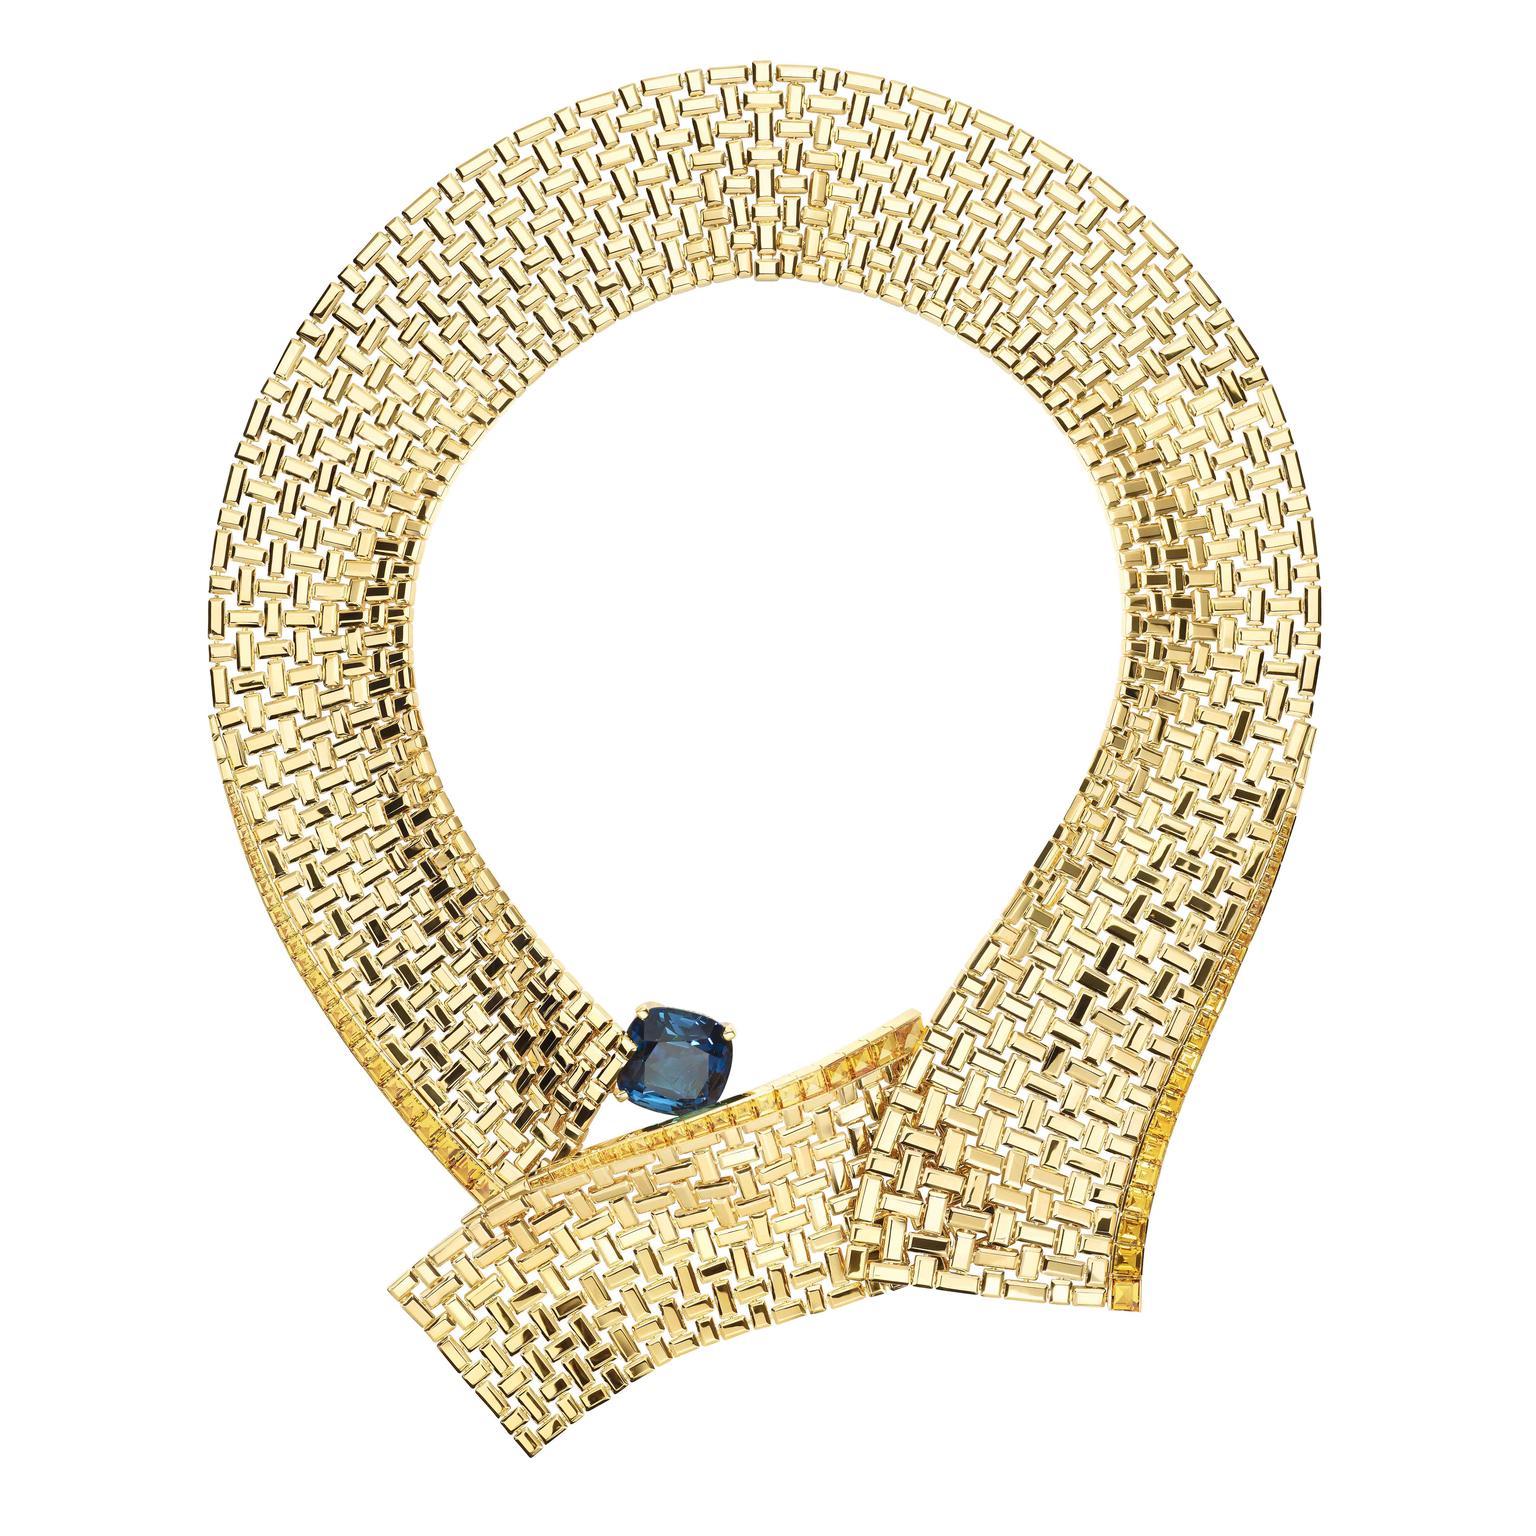 Chaumet Necklace on white